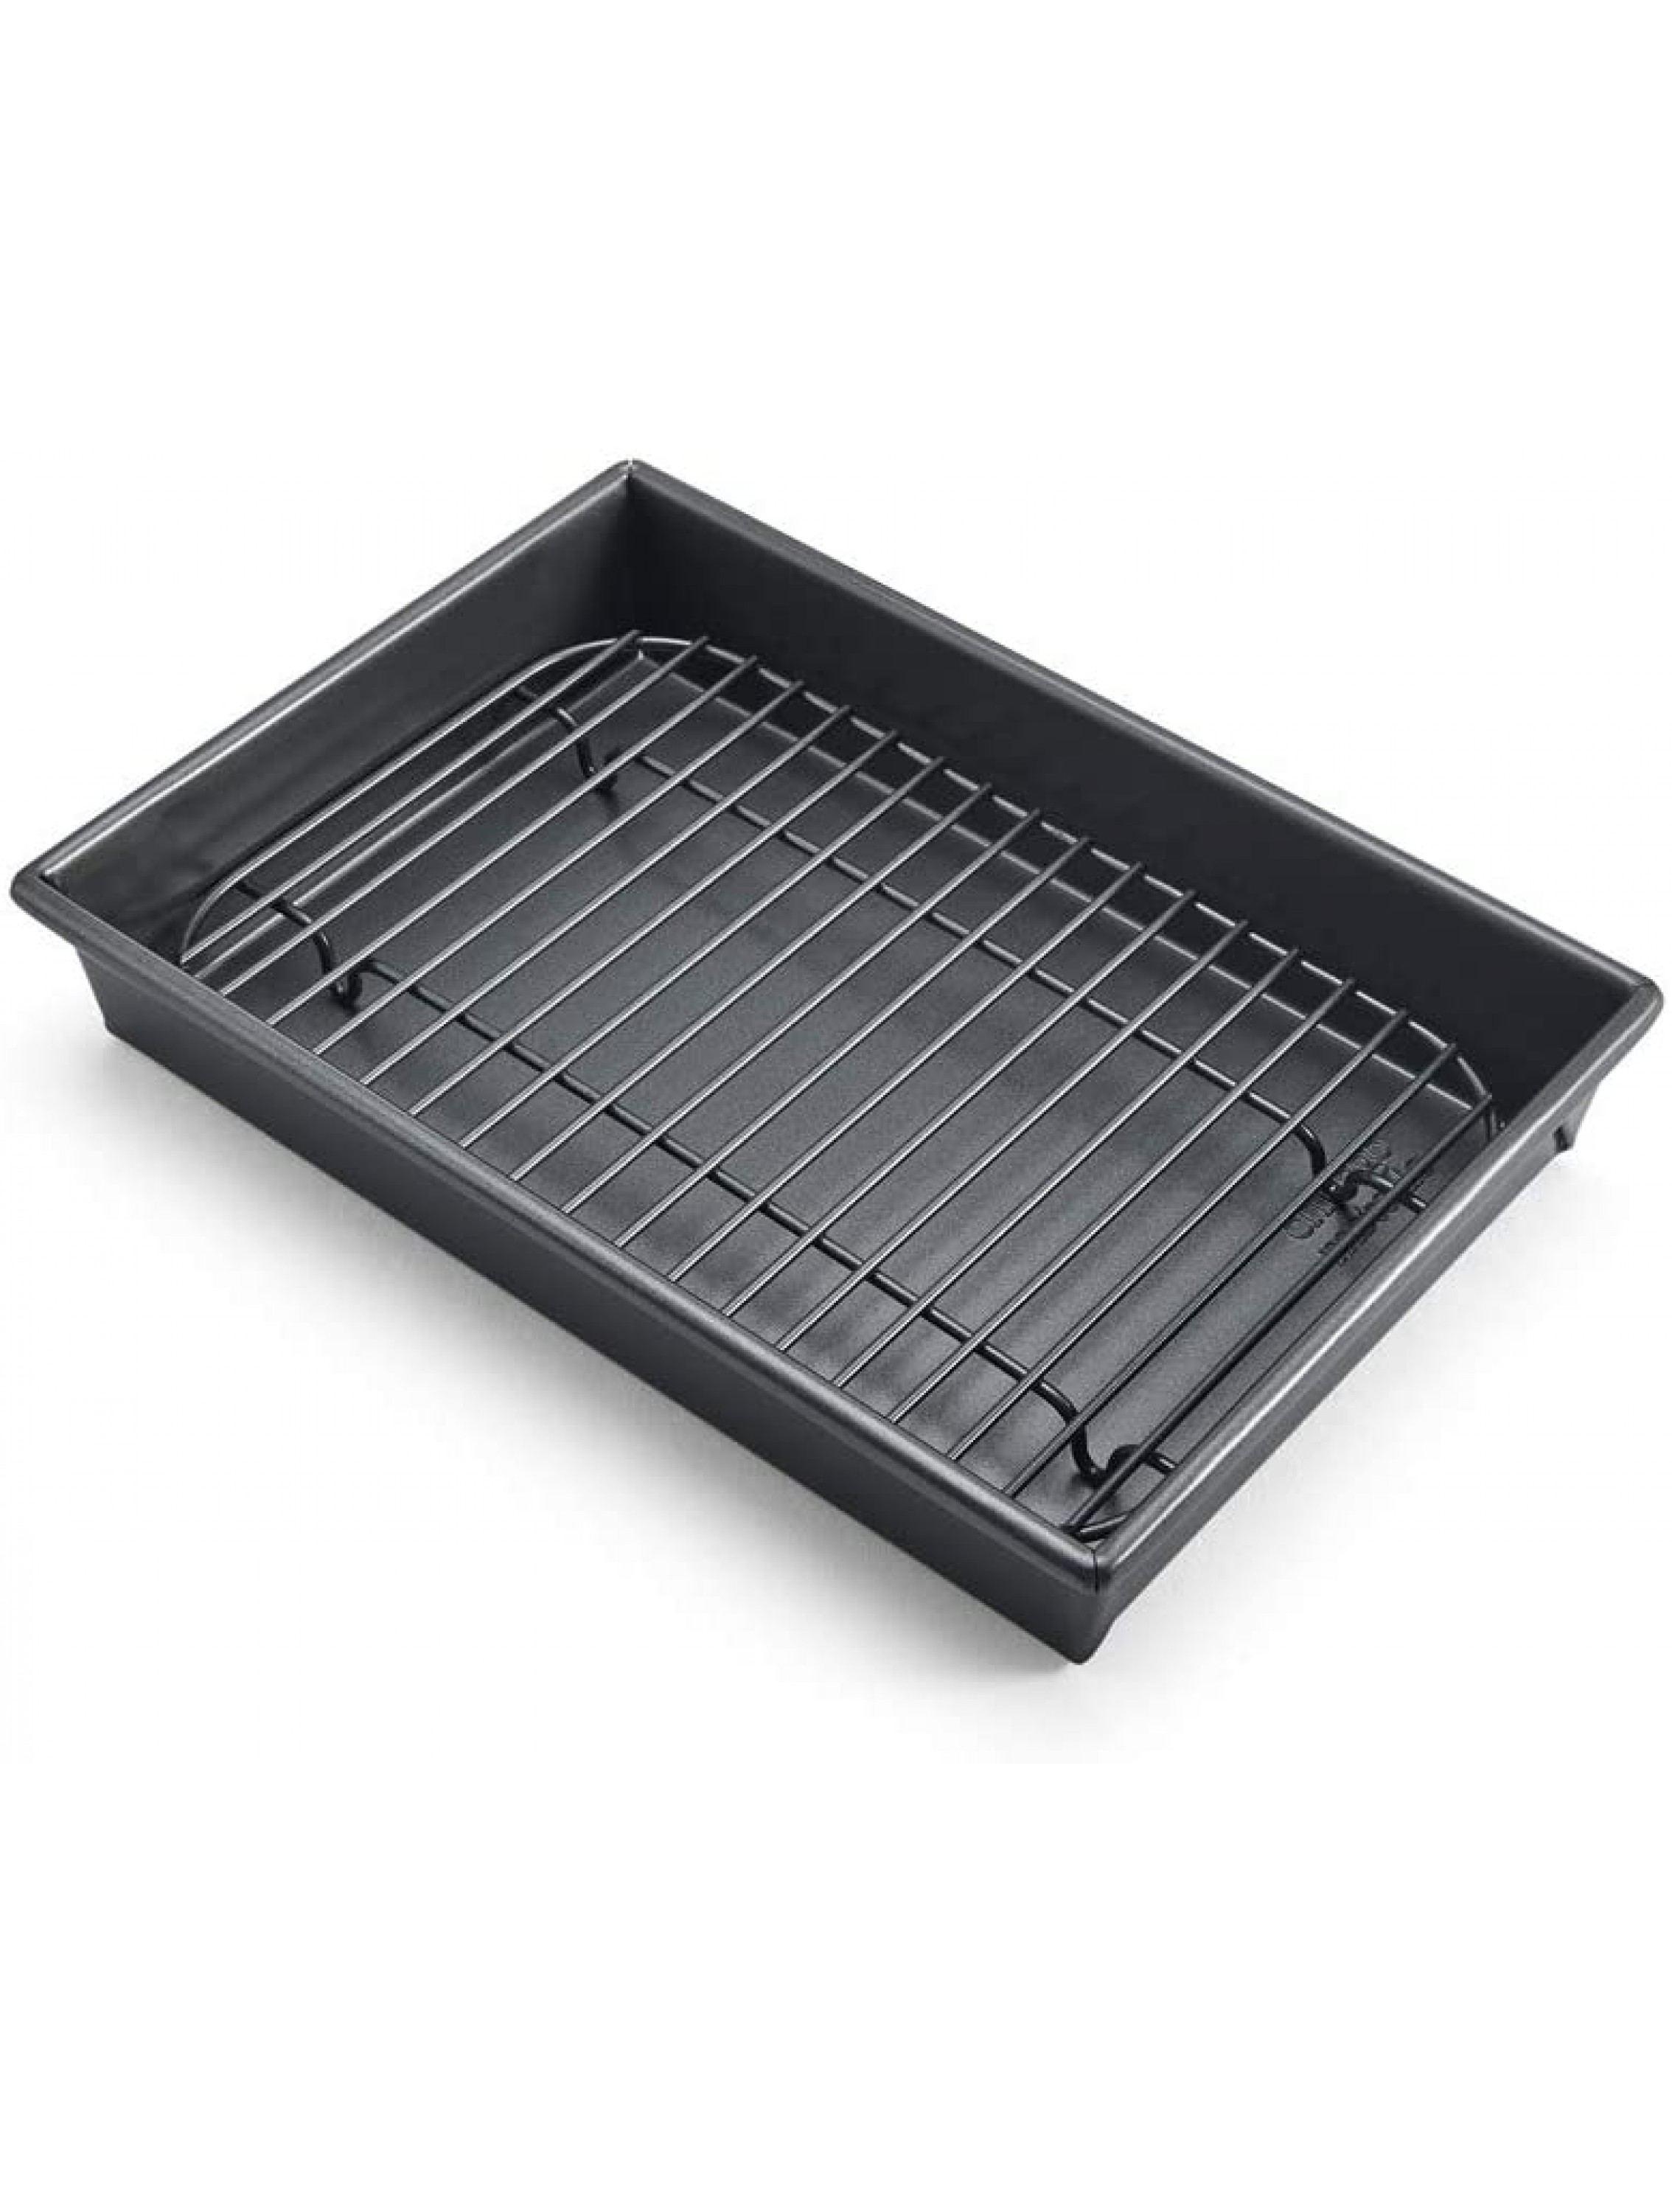 Chicago Metallic 26639 Petite Roast Pan with Rack Grey 10-Inch-by-7-Inch - B0X72SY33